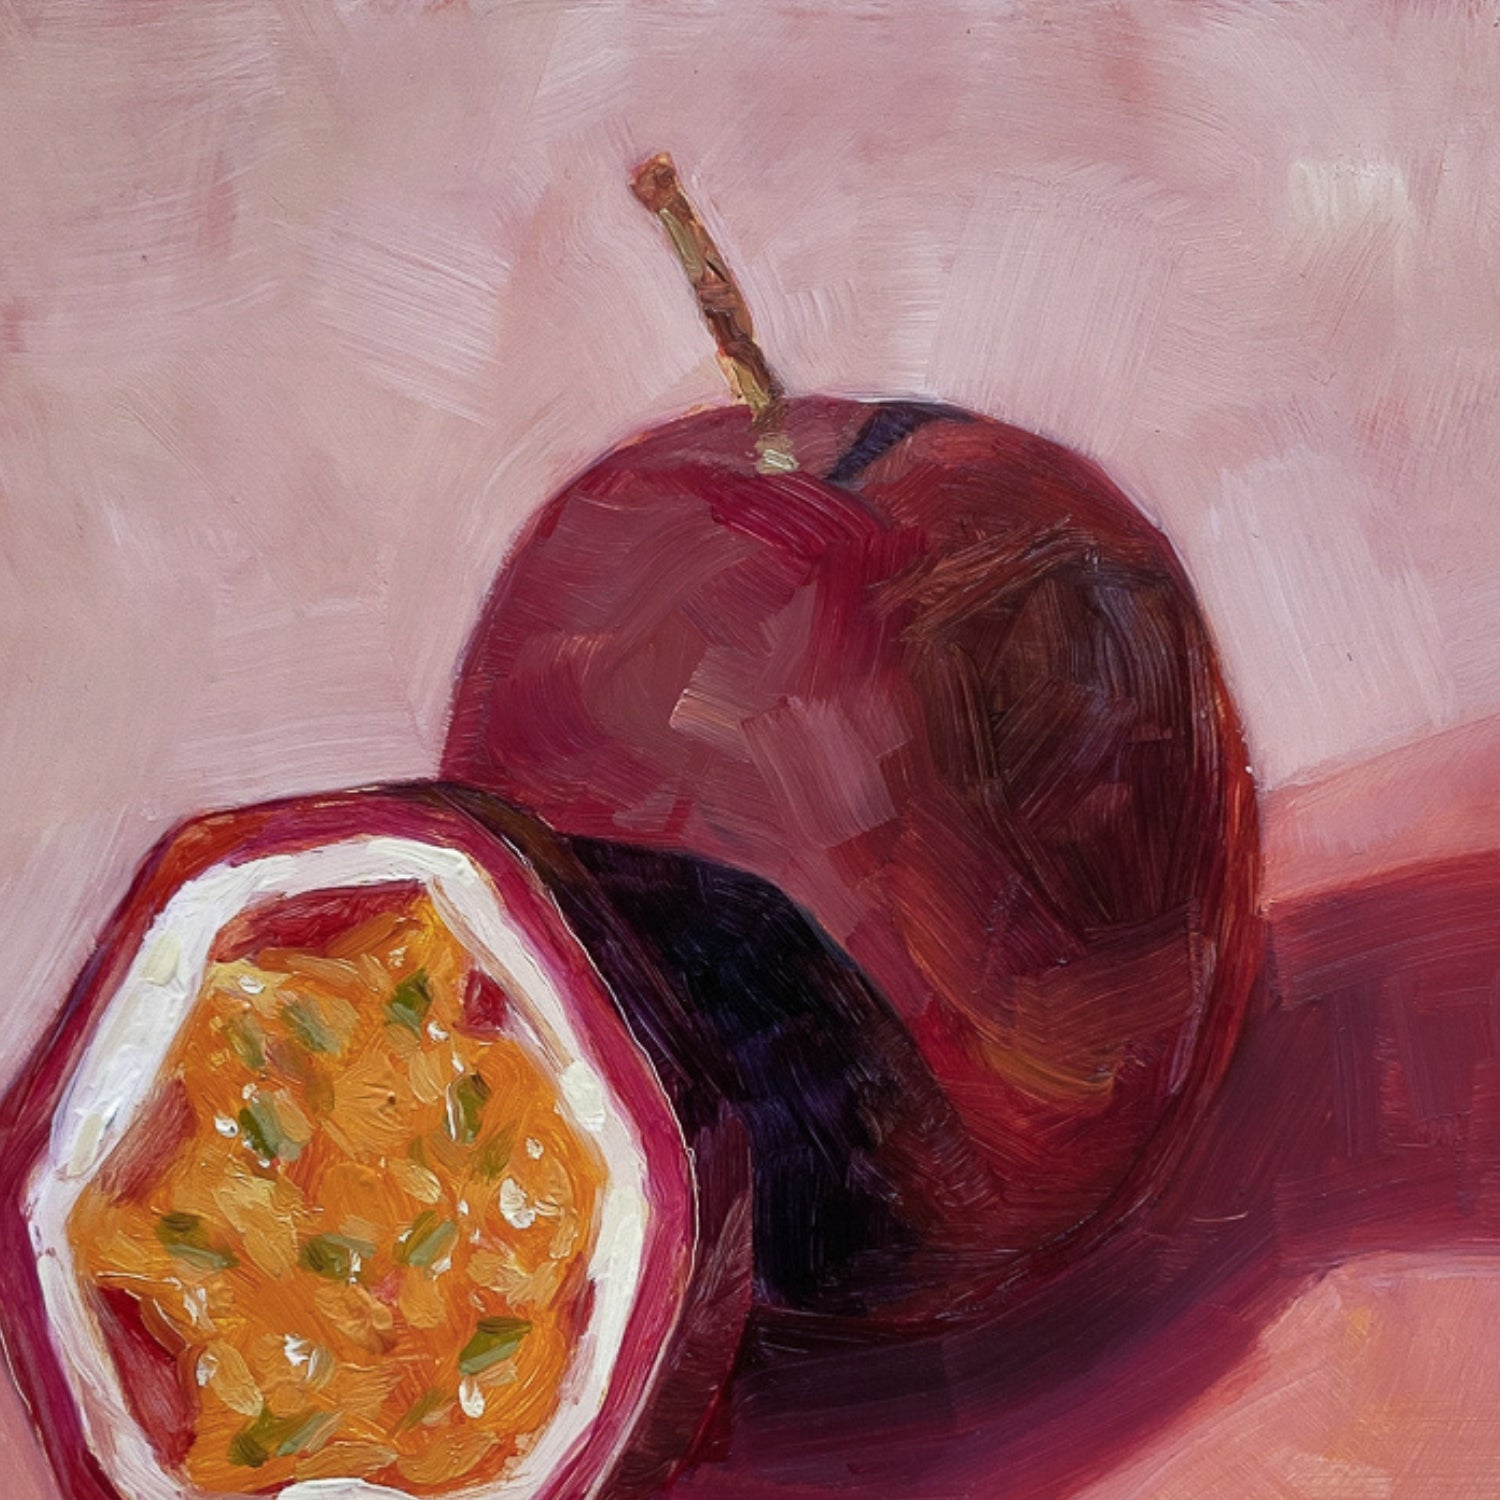   closeup of an original painting of a burgundy, magenta whole passionfruit and half a passionfruit with seeds. They are sitting on a soft pink surface and there are strong shadows and a diagonal background